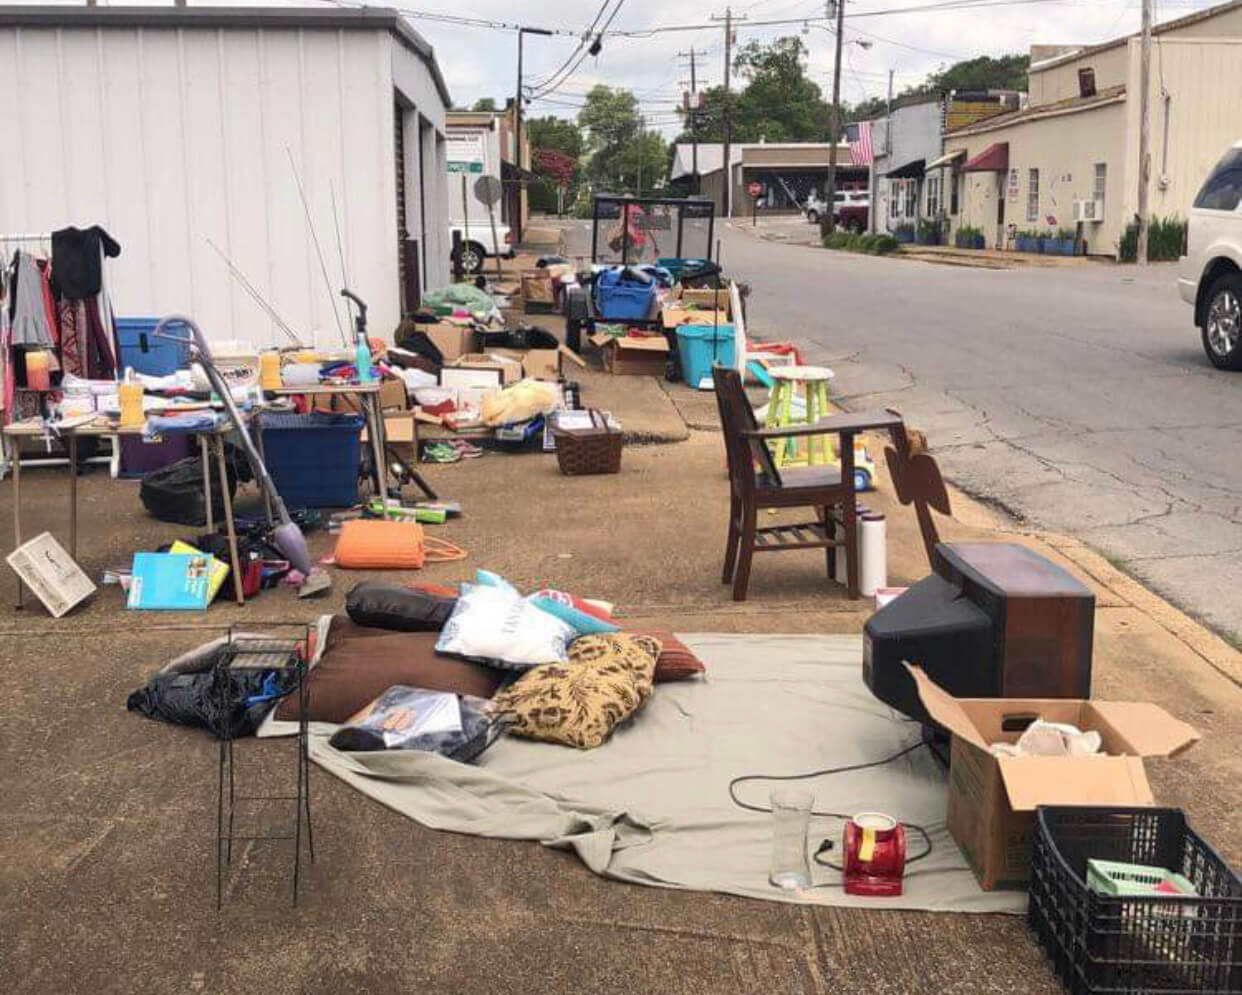 Tippah animal rescue to hold fundraiser yard sale this weekend